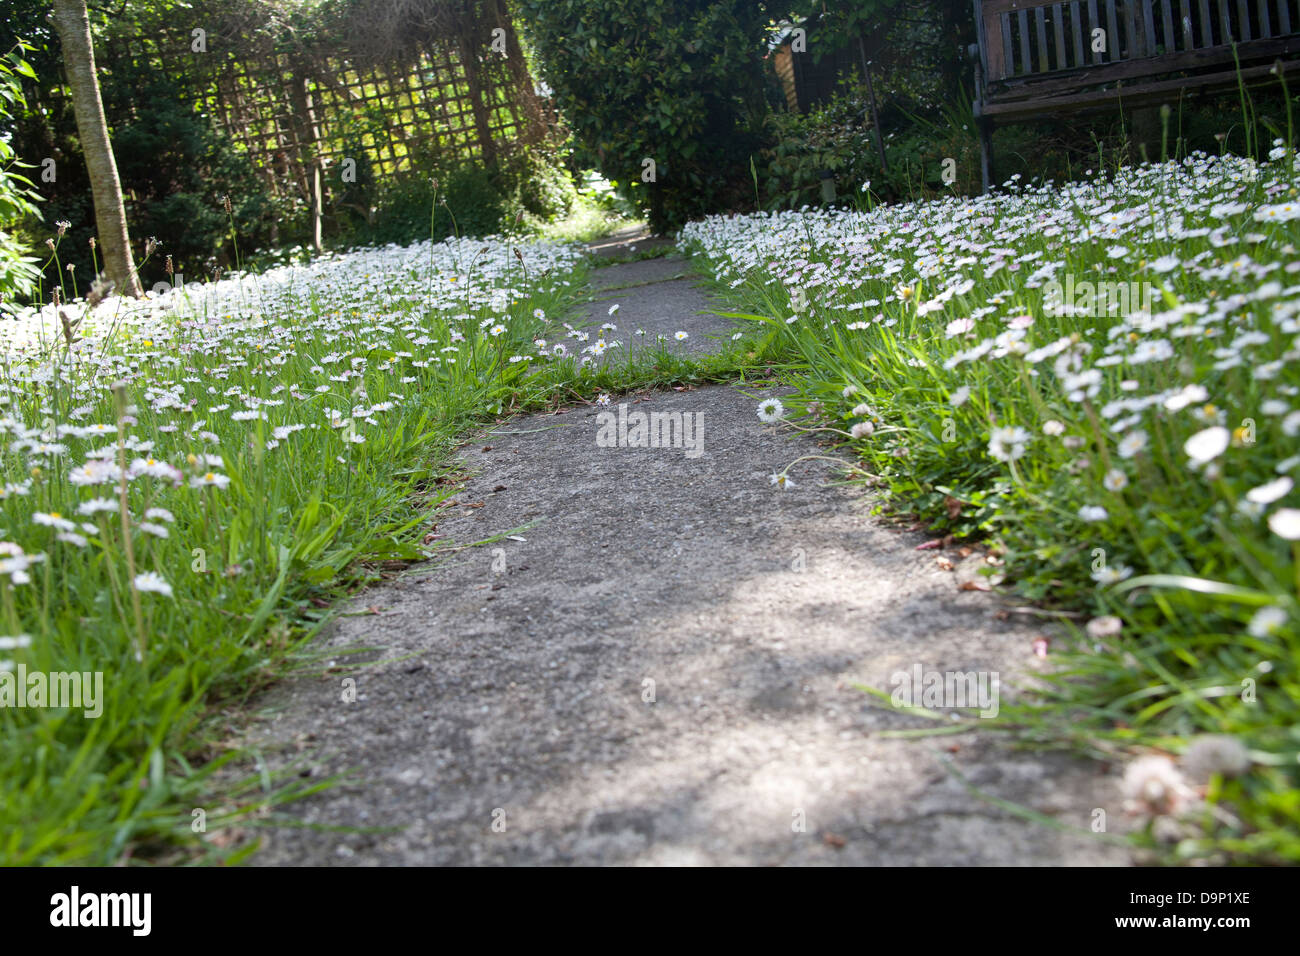 Garden path in Ireland with grass covered in daisies Stock Photo